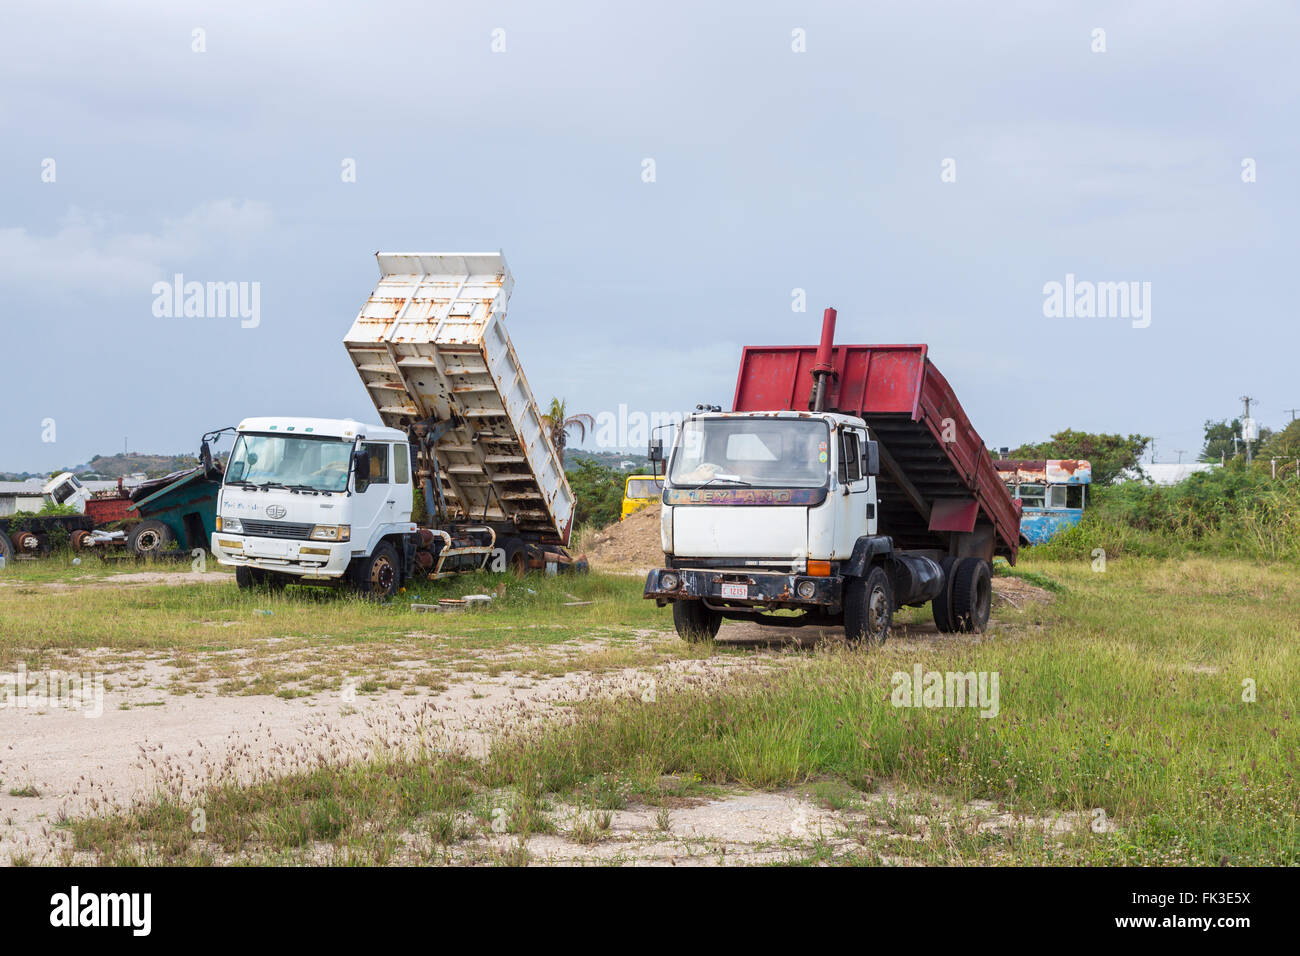 Decaying tipper trucks in Ogg Spencer's Trucking scrapyard, Liberta, south Antigua, Antigua and Barbuda, West Indies Stock Photo